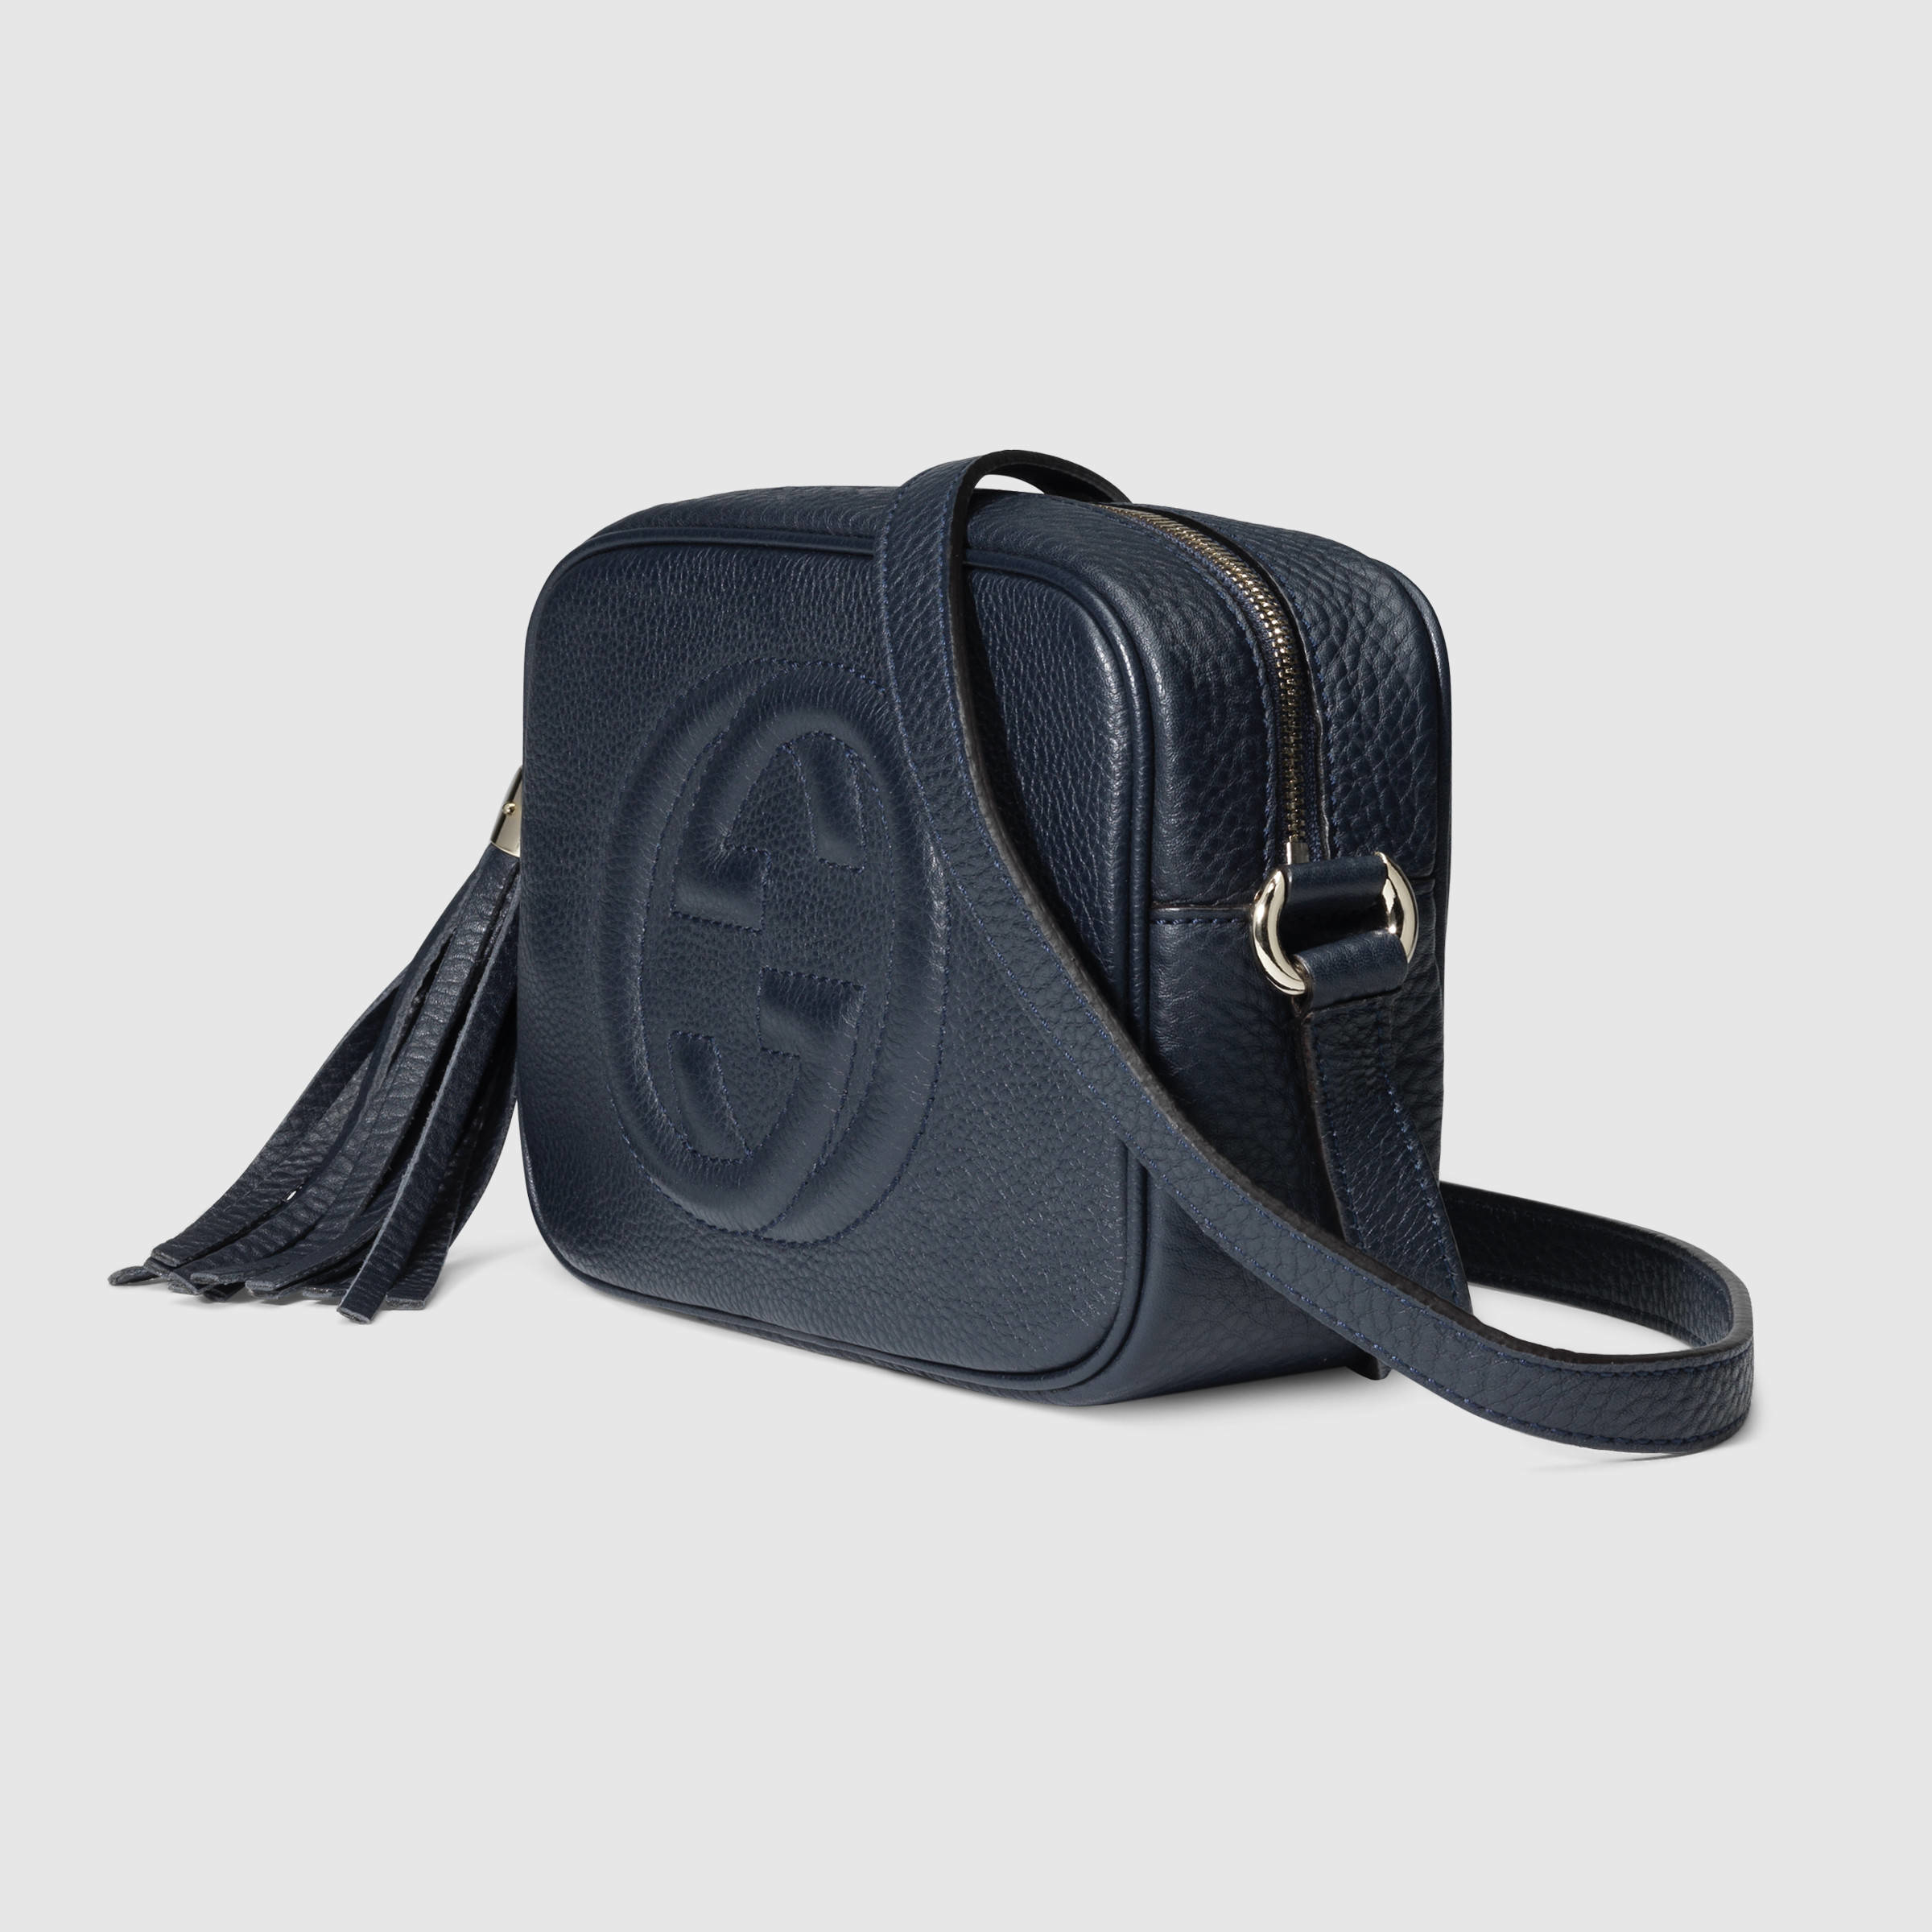 Gucci Soho Leather Disco Bag in Blue Leather (Blue) - Lyst